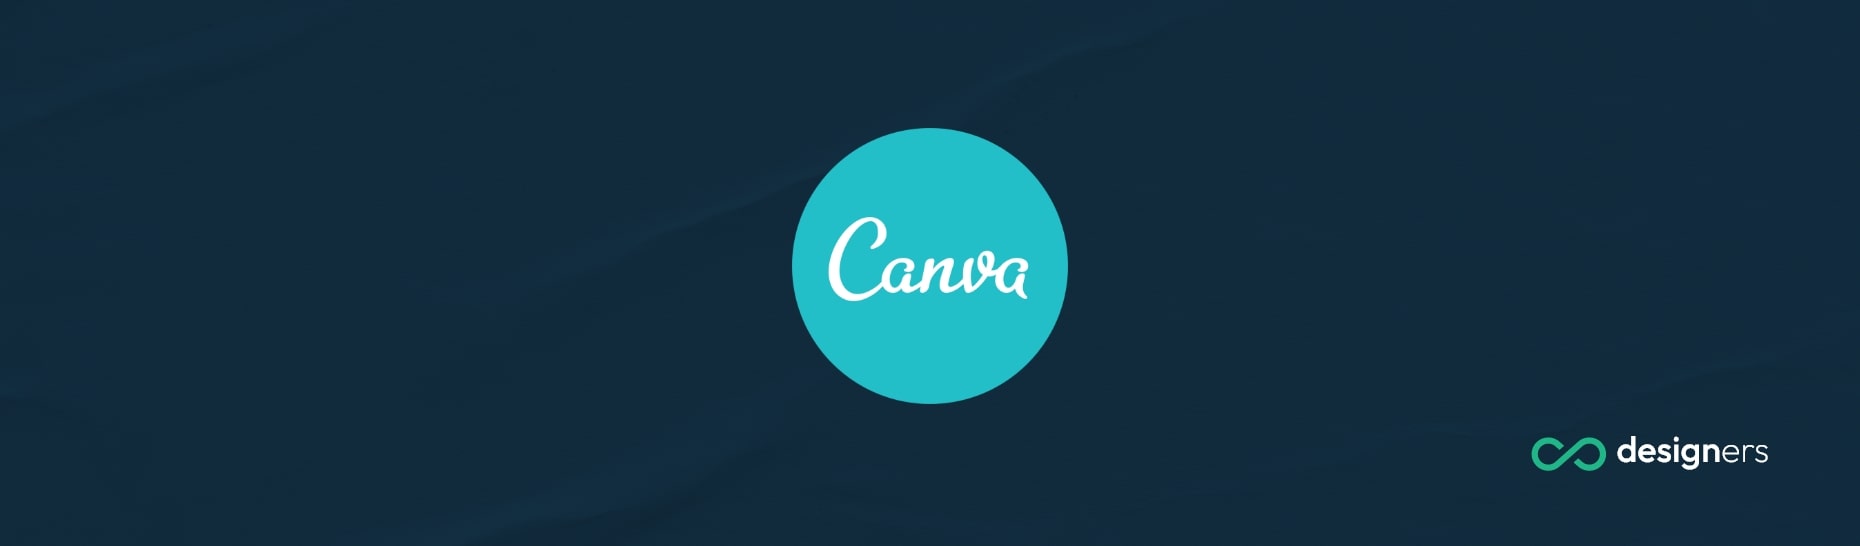 Does Canva Have a Dark Mode?